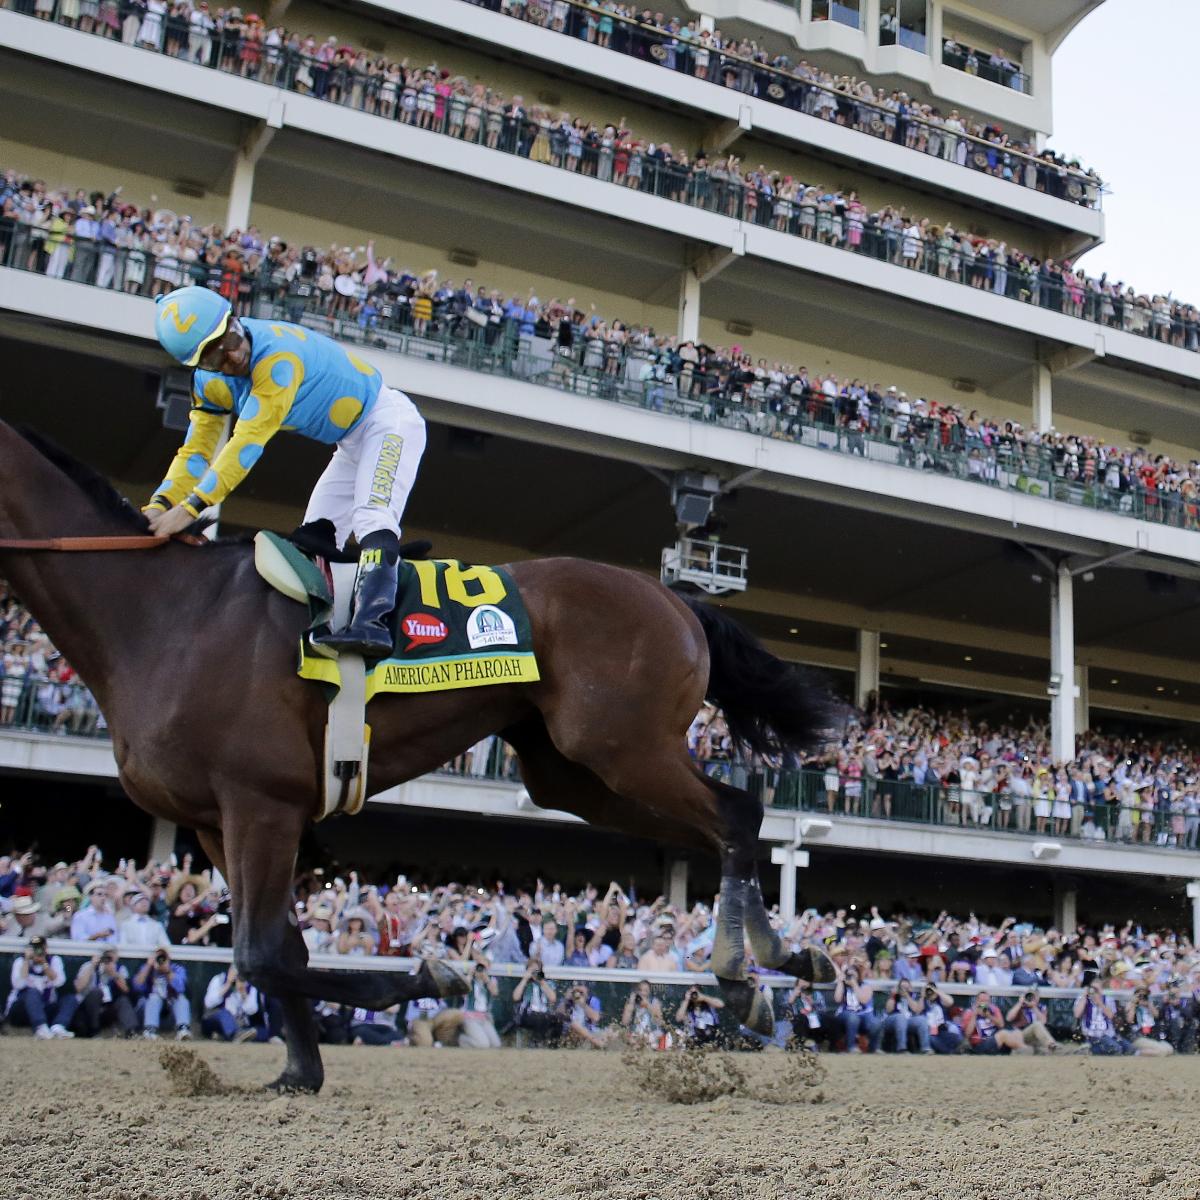 Kentucky Derby 2015 Race Replay, Highlights, Analysis and Prize Money